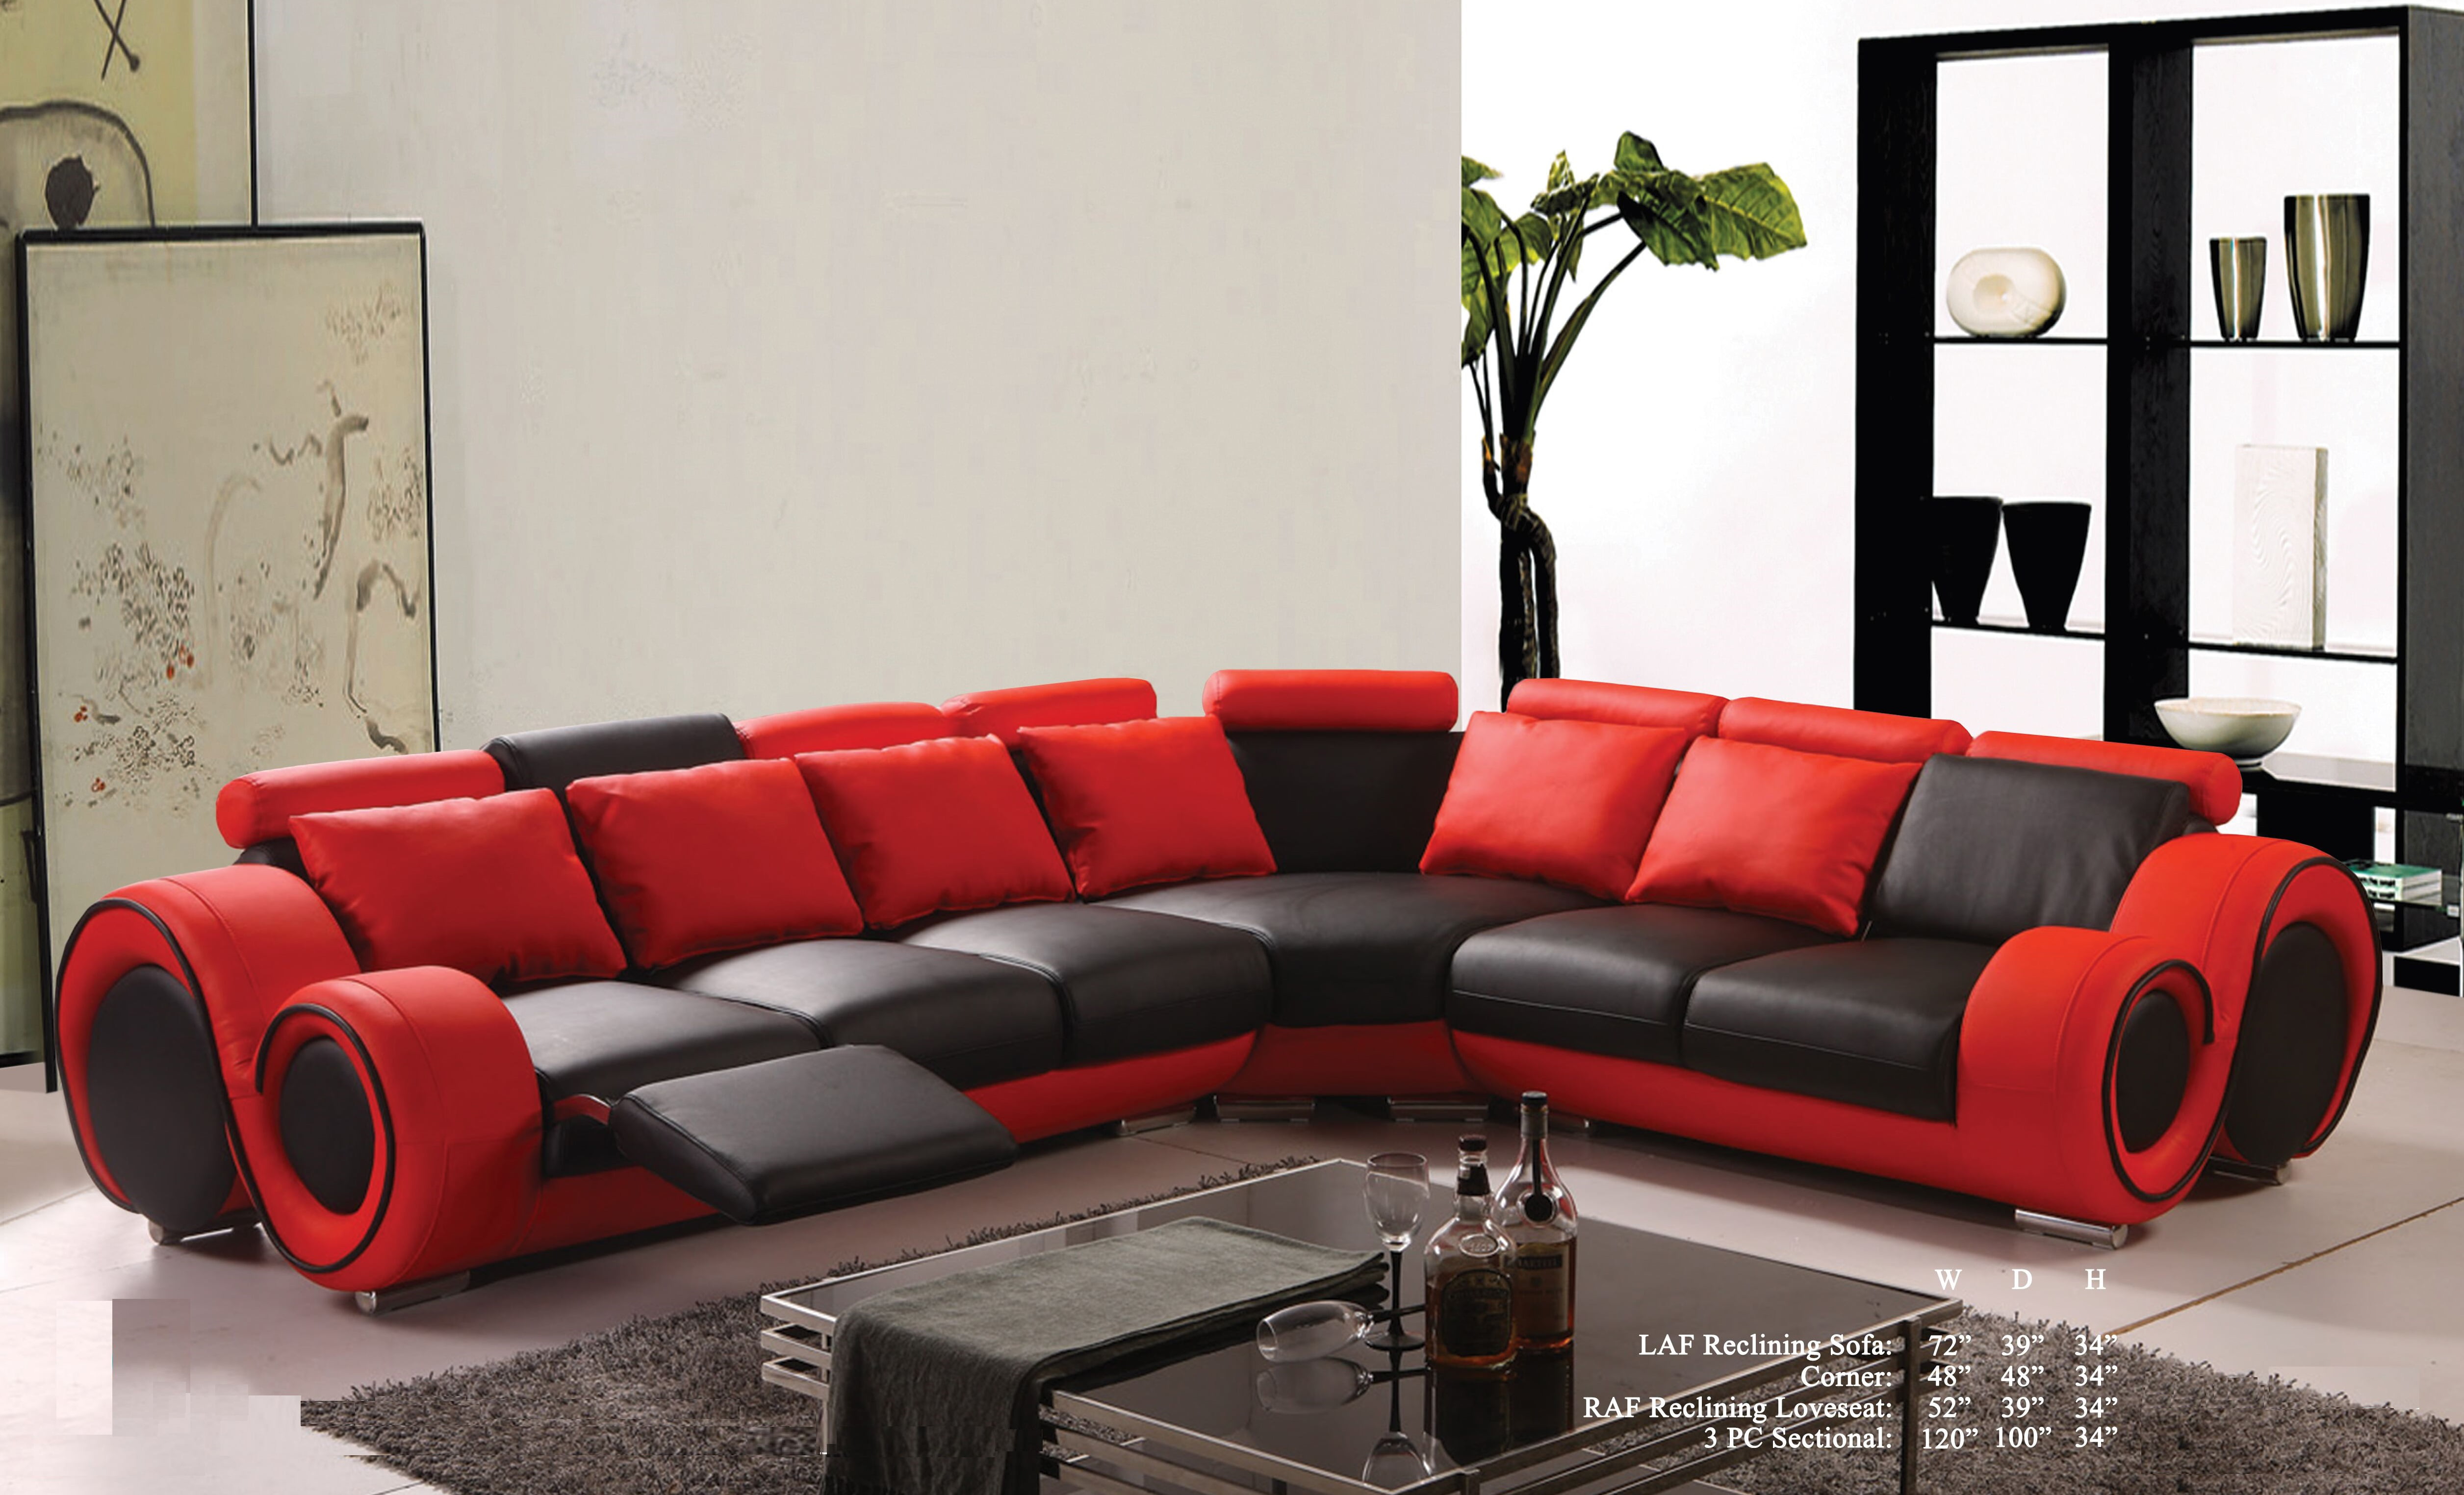 Black Bonded Leather Sectional Sofa Set, Dark Red Leather Couch